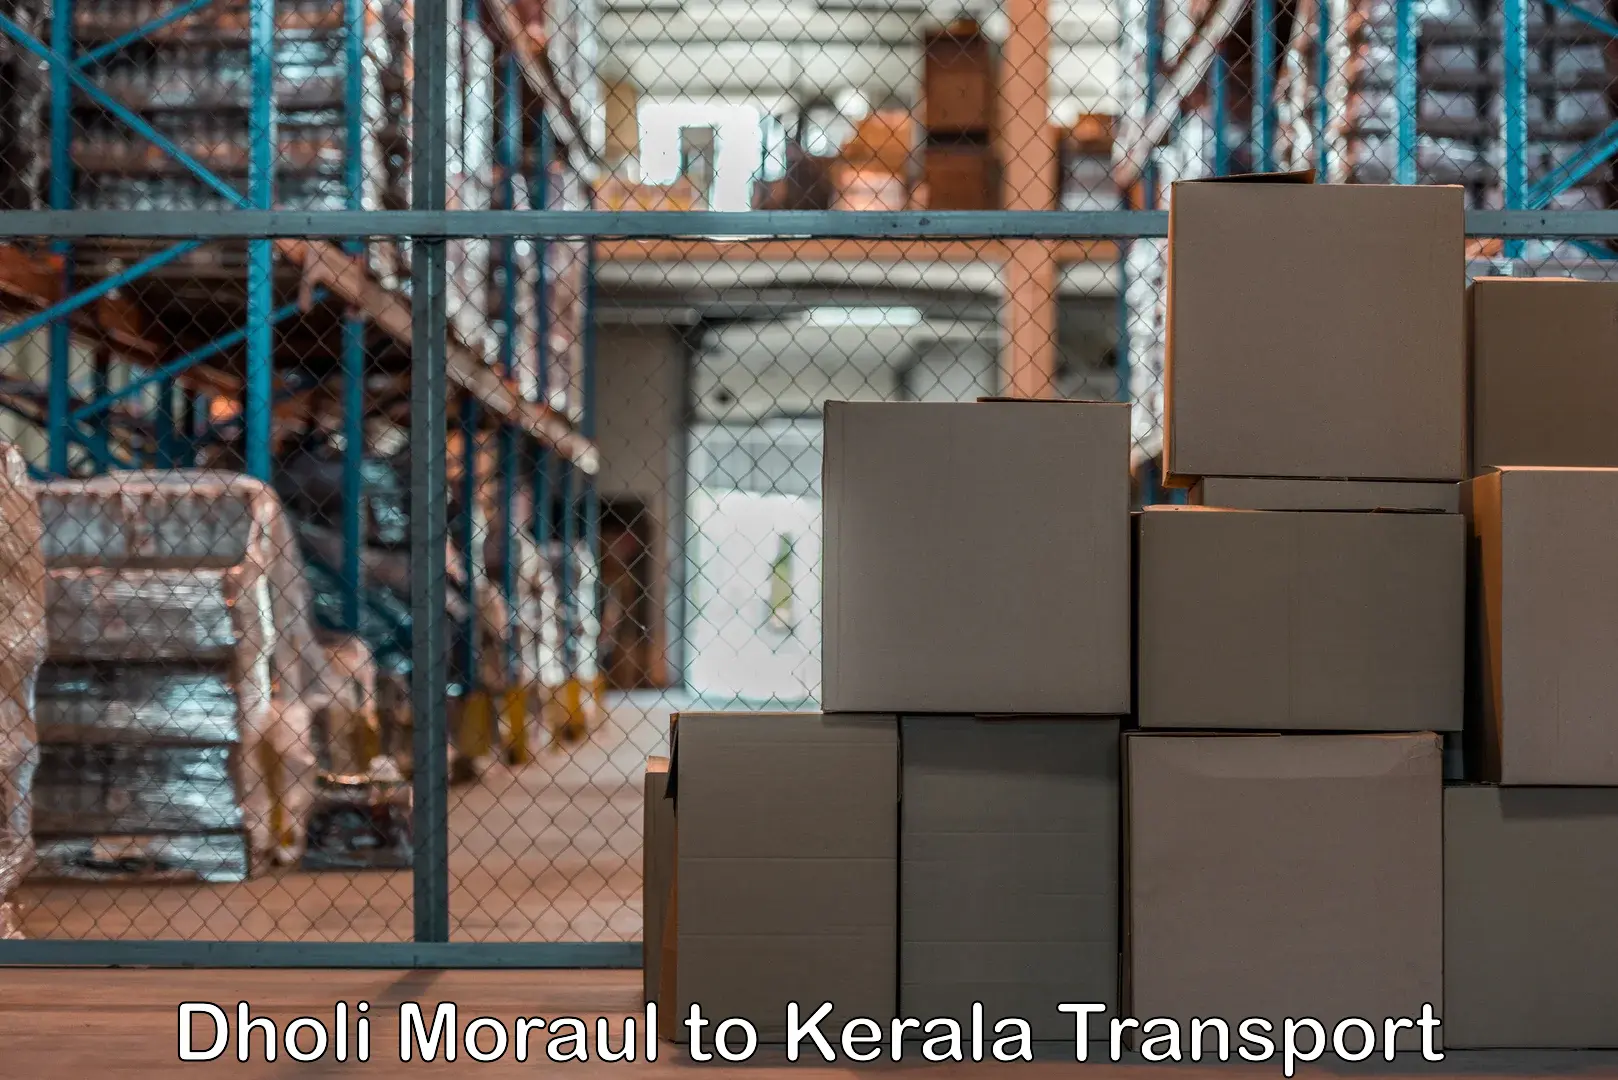 Road transport online services Dholi Moraul to Cochin University of Science and Technology